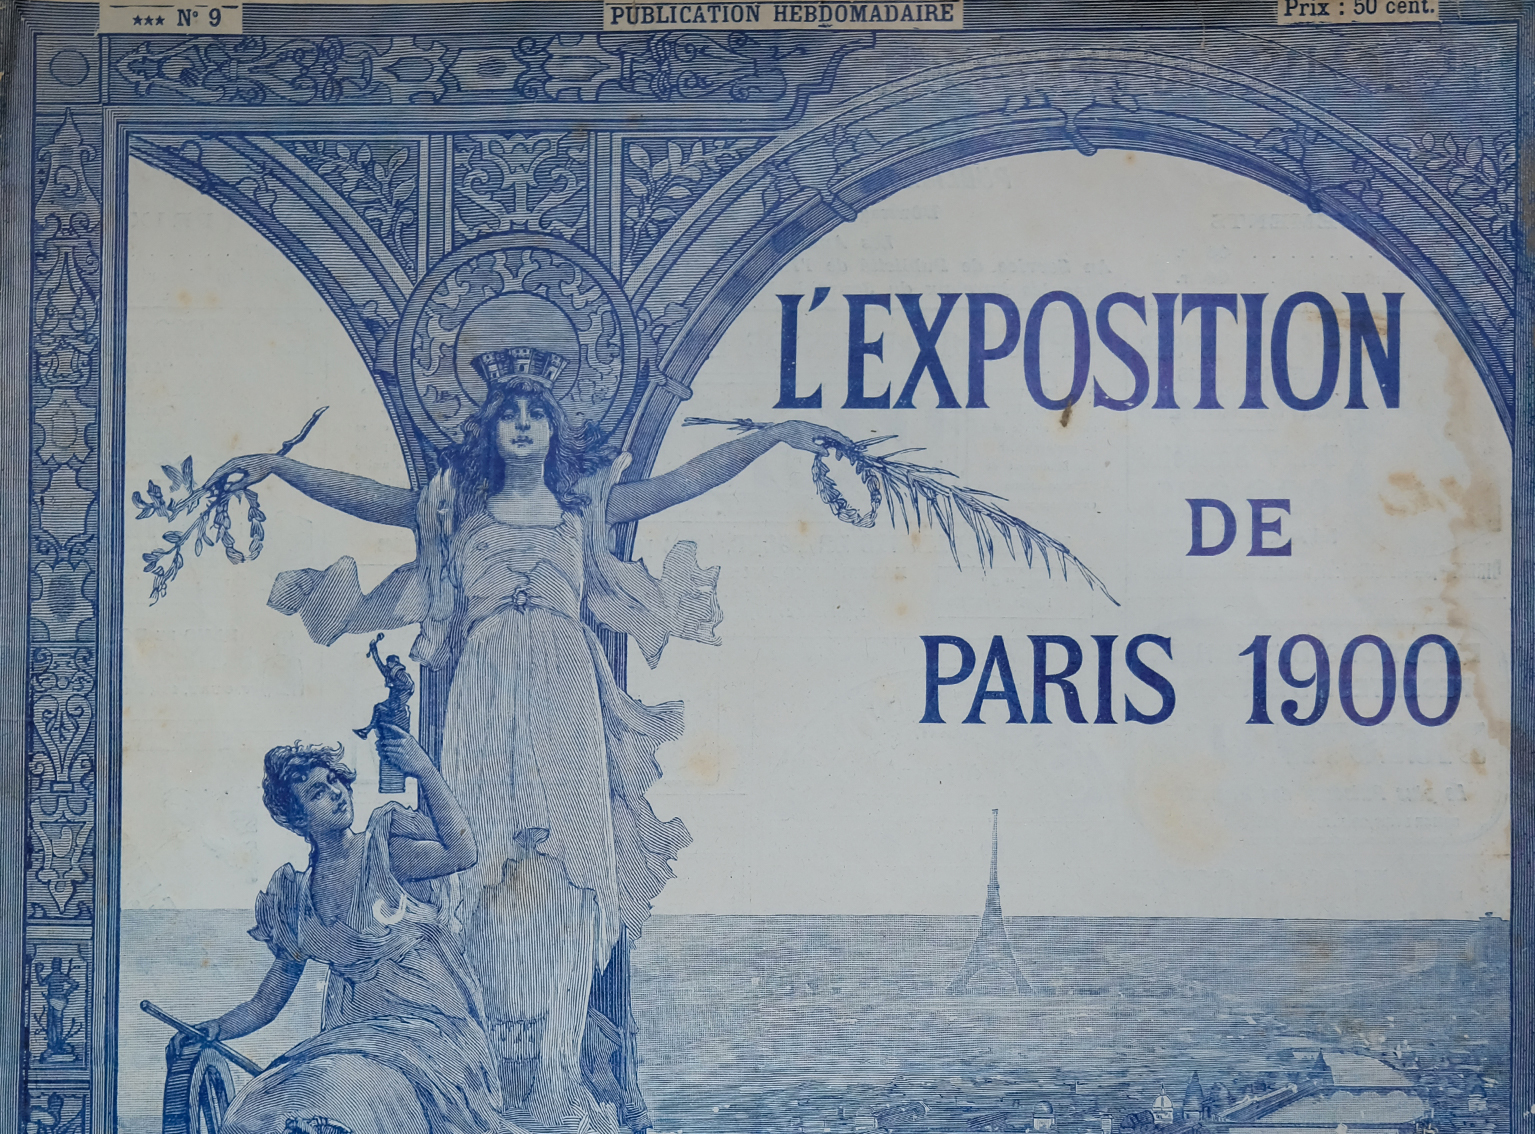 Reconsitution-historique-exposition-universelle-1900